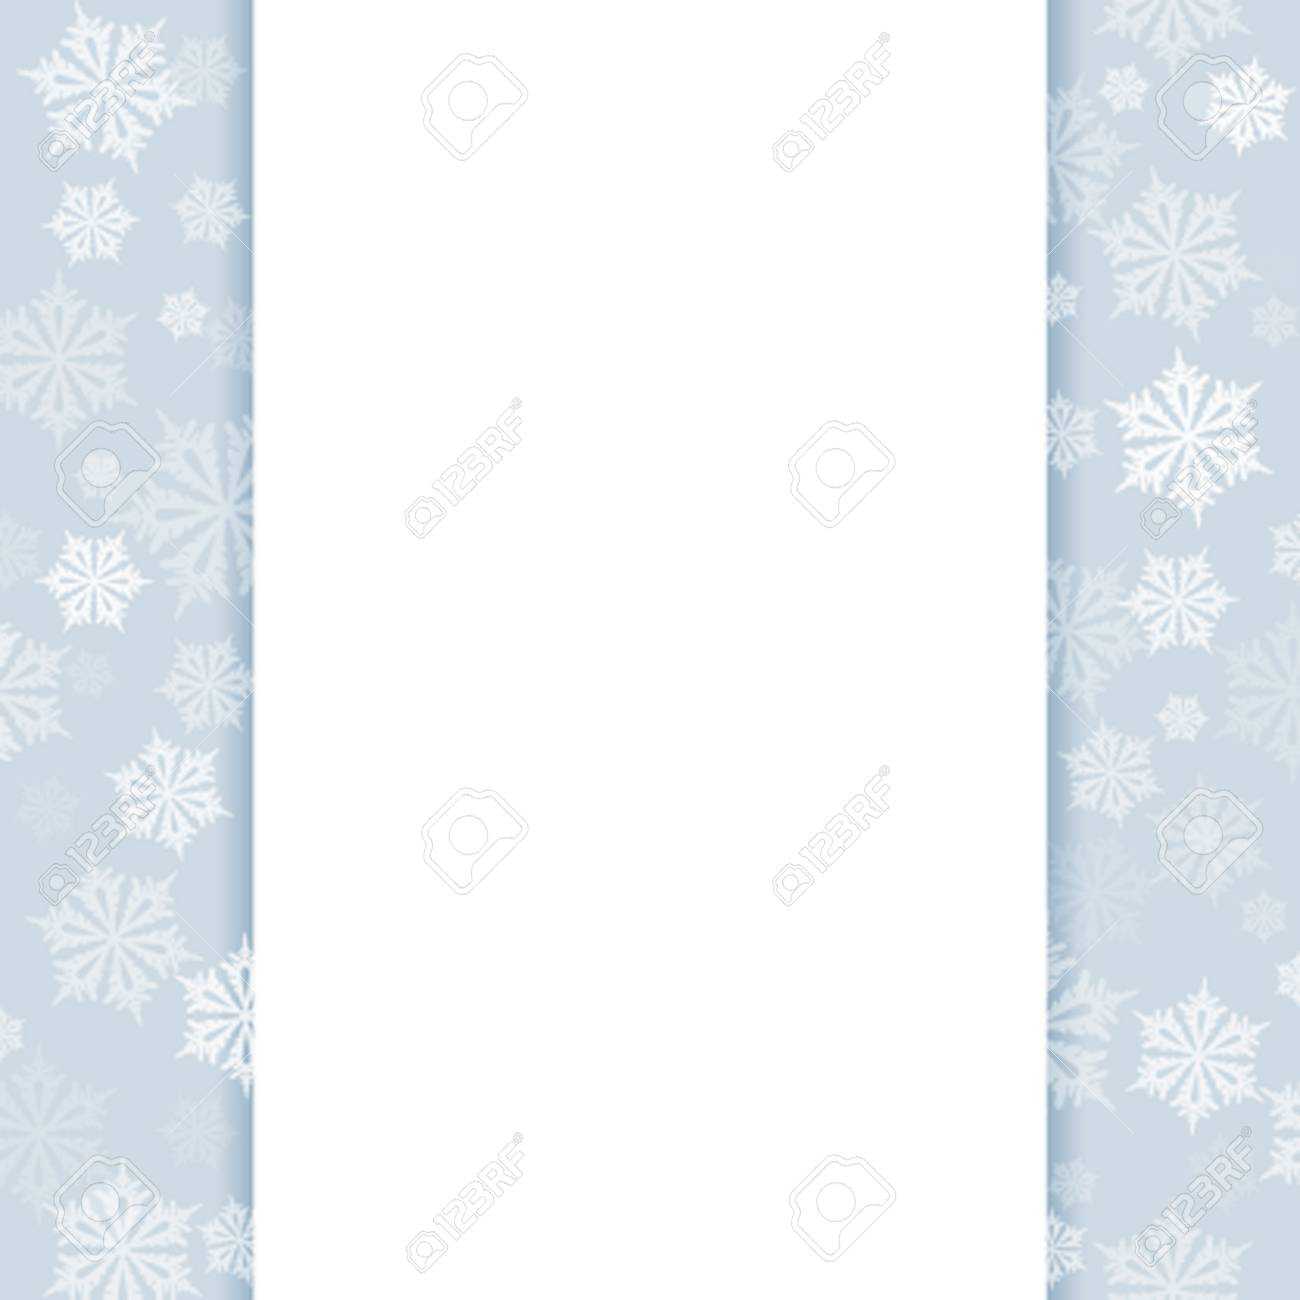 Blank Christmas Card Or A Letter To Santa. A Brochure Template.. With Blank Snowflake Template